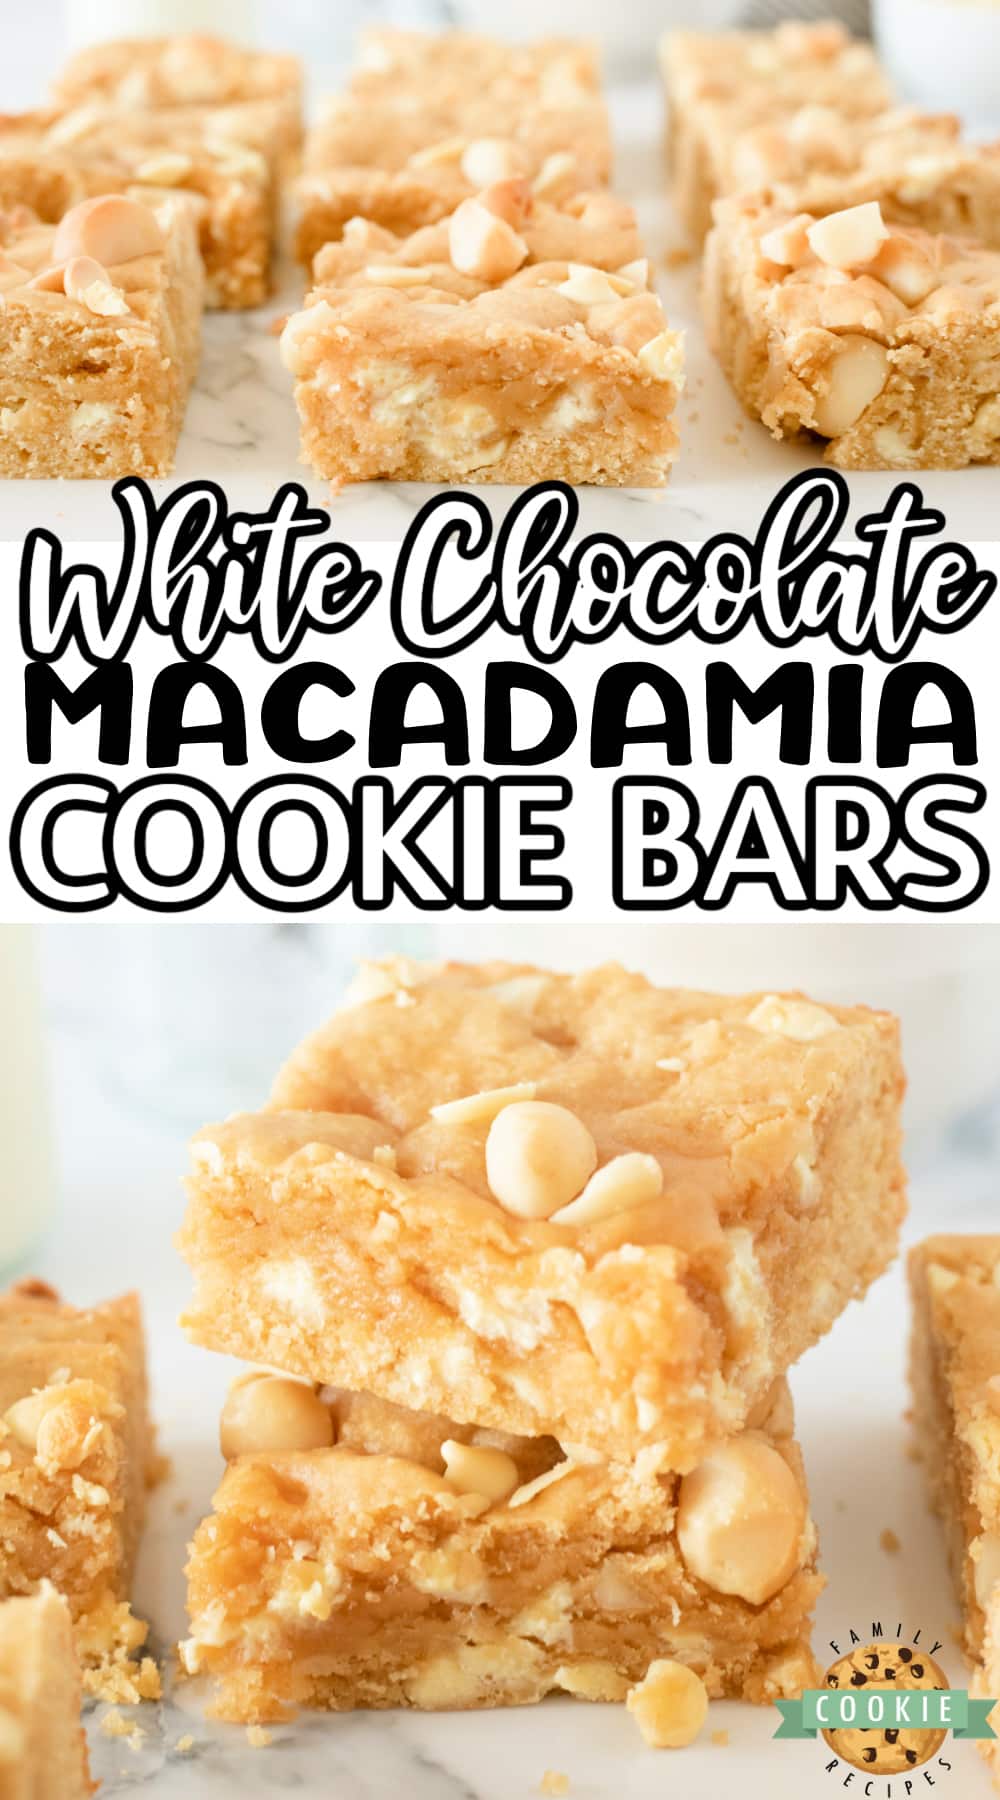 White Chocolate Macadamia Cookie Bars are thick, soft and absolutely delicious. Simple cookie bar recipe packed with white chocolate chips and macadamia nuts. via @buttergirls